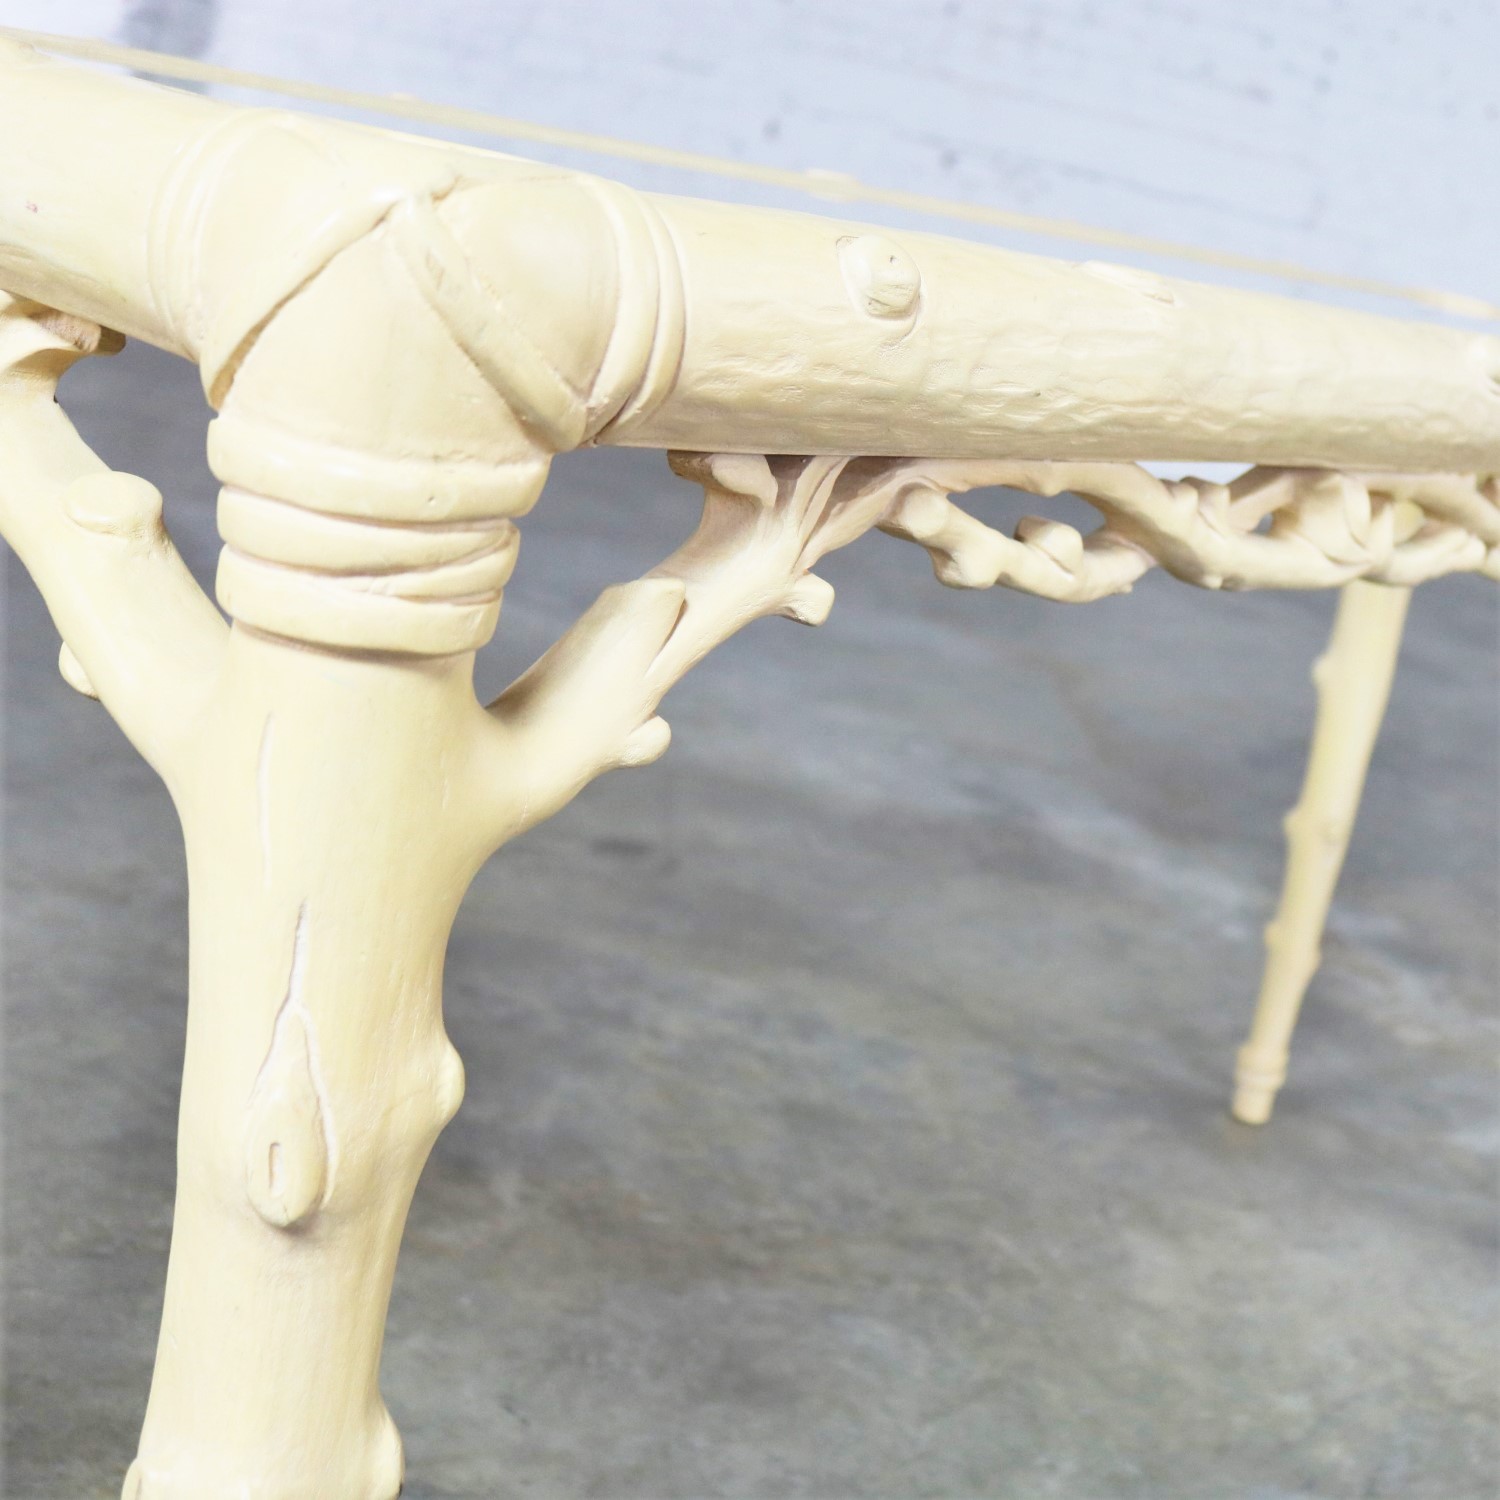 Carved Wood Faux Bois Sofa Console Table with Ivory Painted Finish and Glass Top Insert